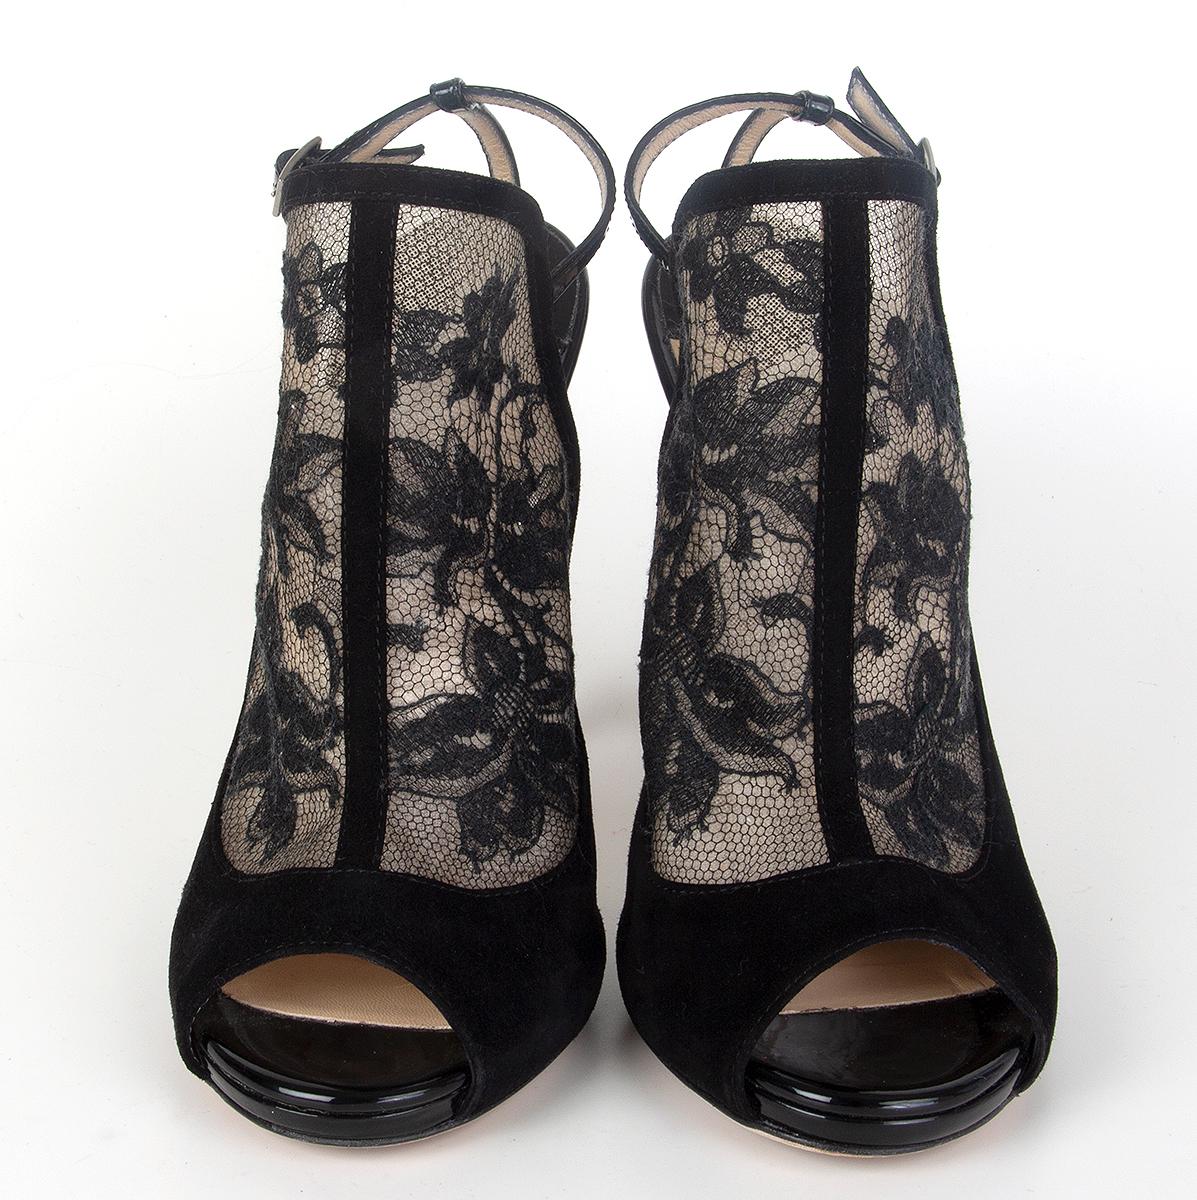 100% authentic Jimmy Choo 'Maylen' lace sandals in black suede and patent leather heel and ankle-strap. Have been worn and are in excellent condition. Come with dust bag. 

Measurements
Imprinted Size	36
Shoe Size	36
Inside Sole	22.5cm